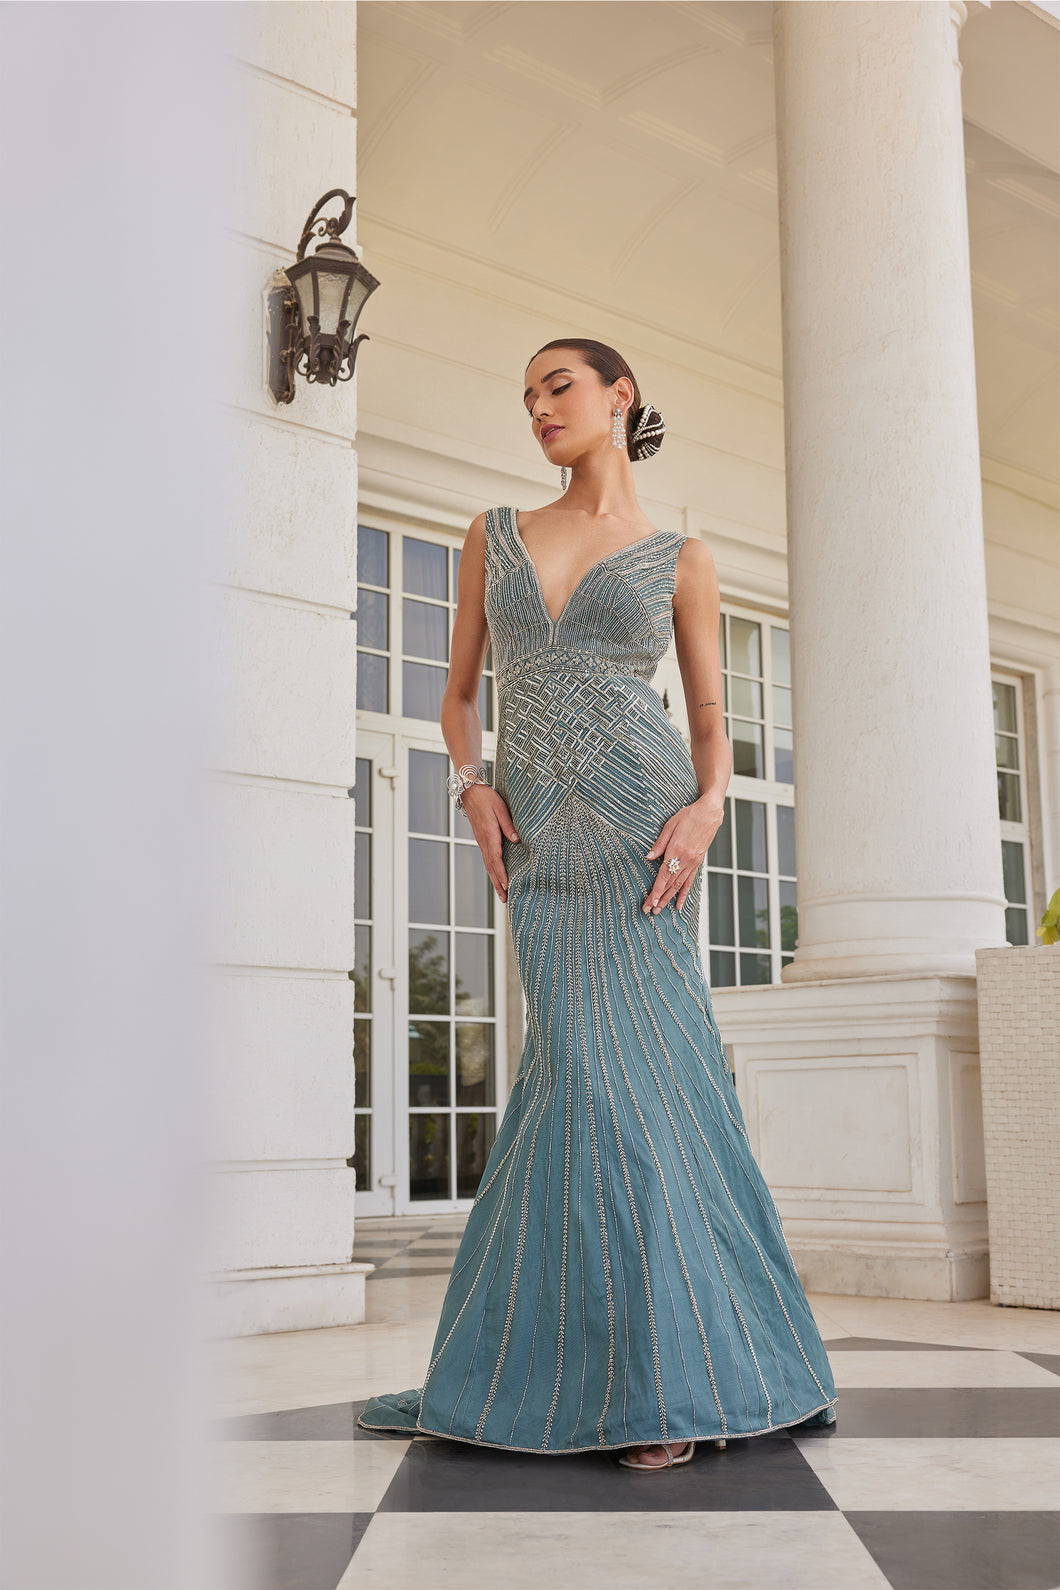 AQUA BLUE EMBROIDERED GOWN